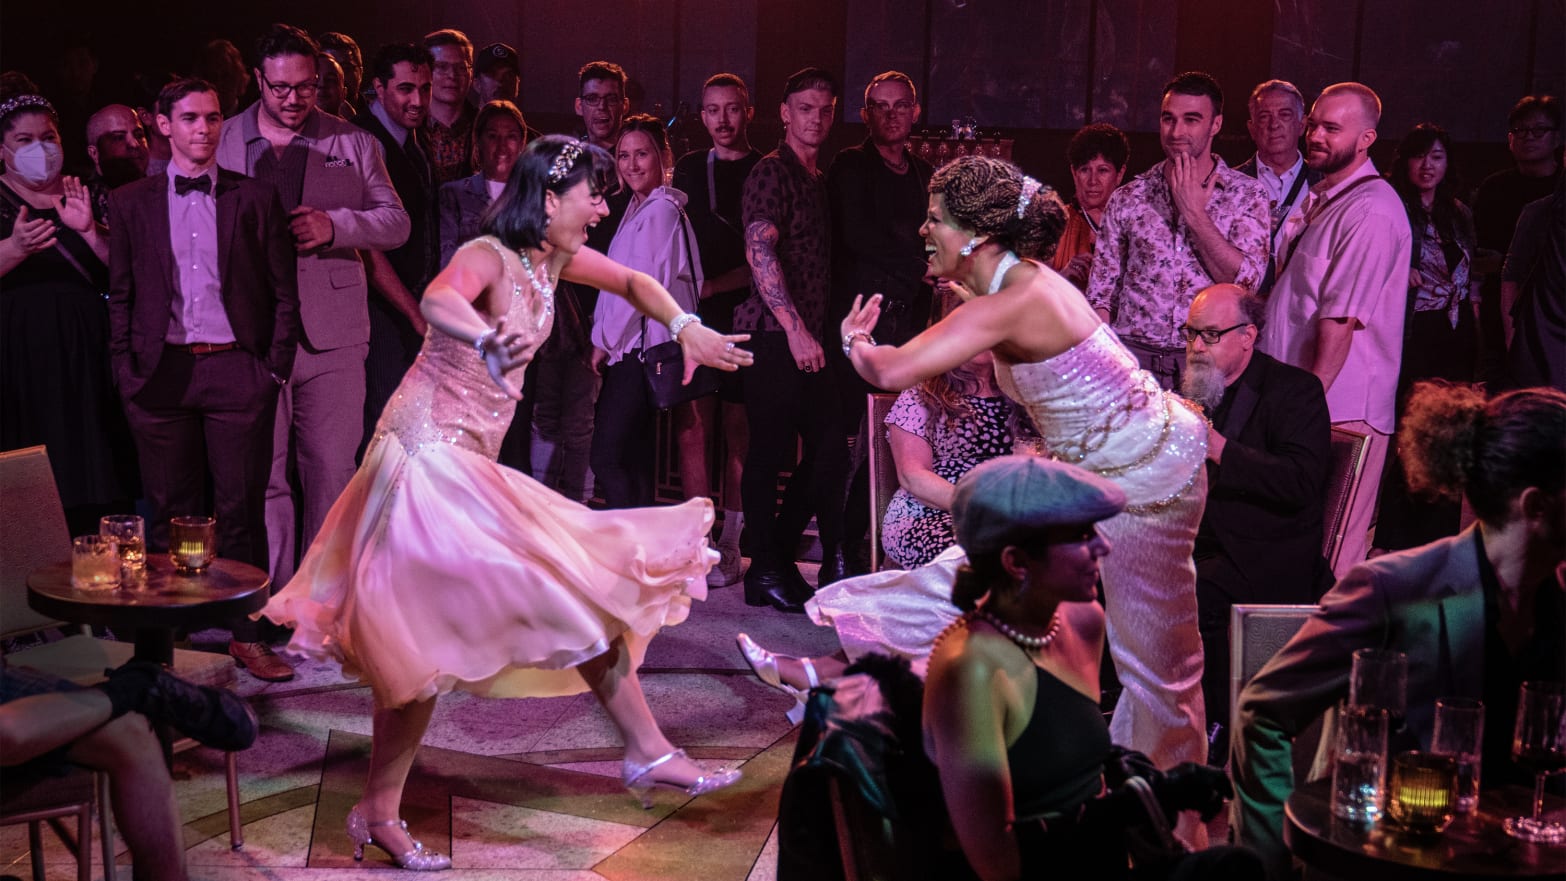 The Great Gatsby—The Immersive Show